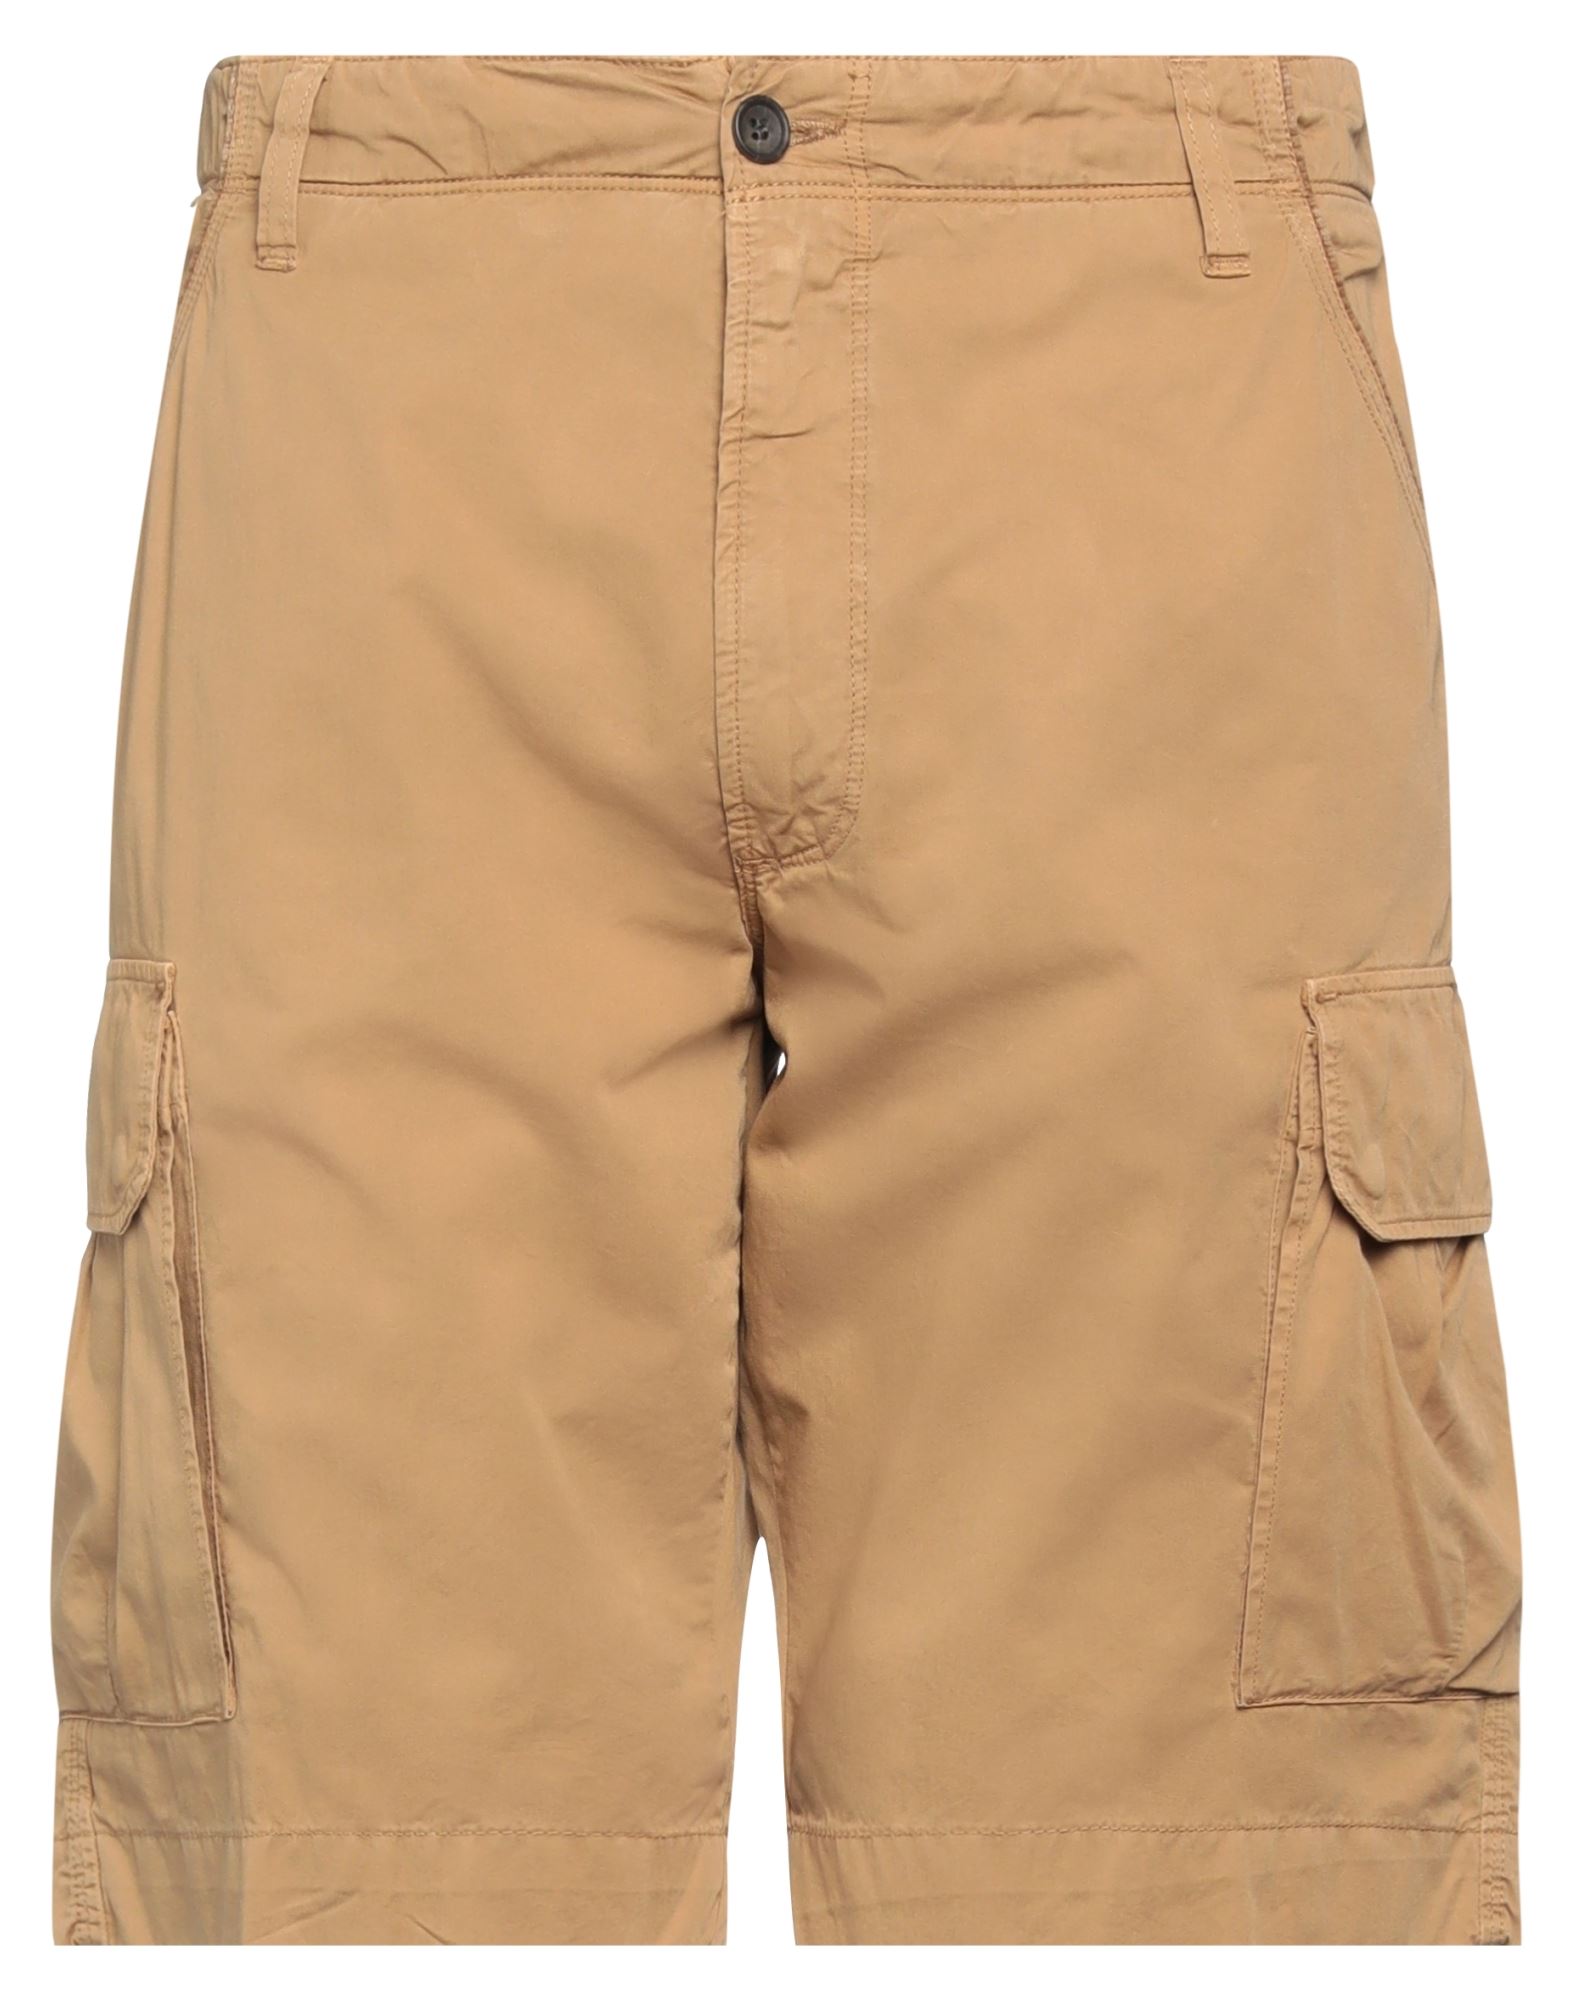 Perfection Man Shorts & Bermuda Shorts Camel Size 30 Cotton In Beige